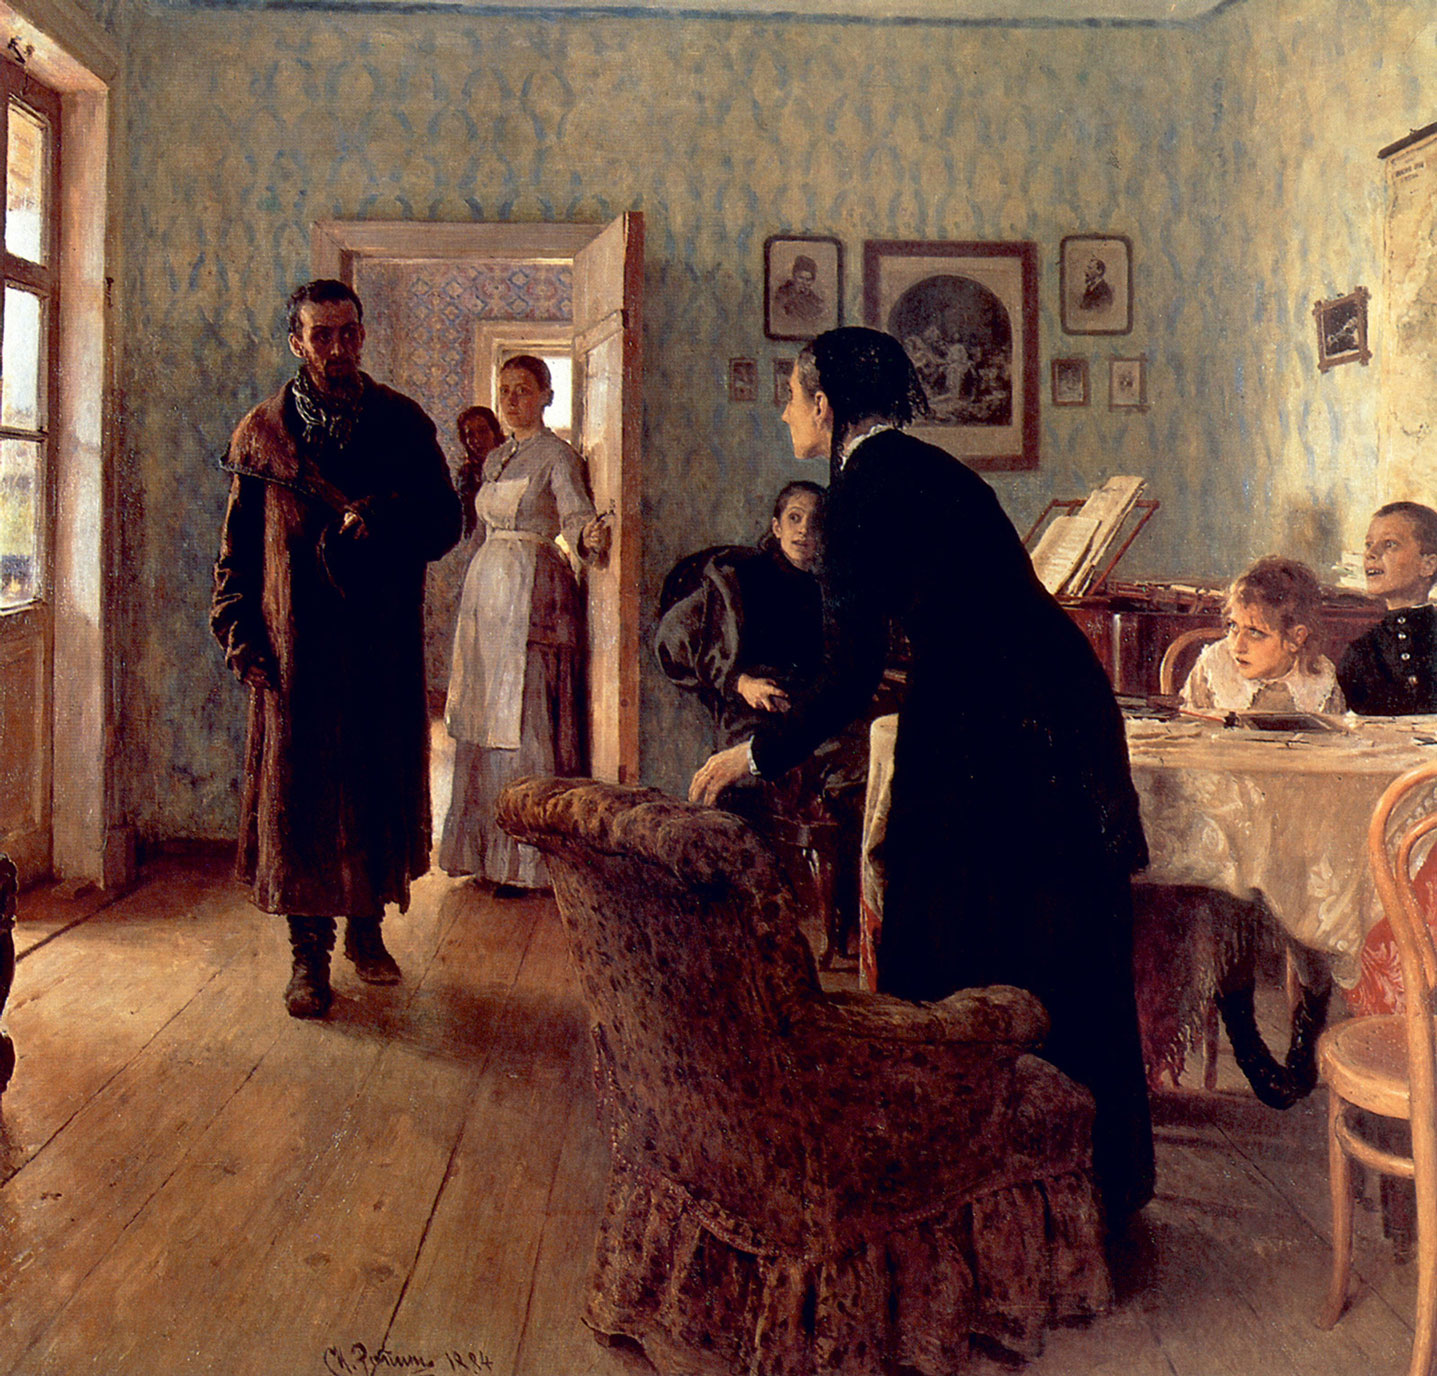 [An Unexpected Visitor (Ilya Repin, 1884)](https://www.cabinetmagazine.org/issues/30/archibald.php)